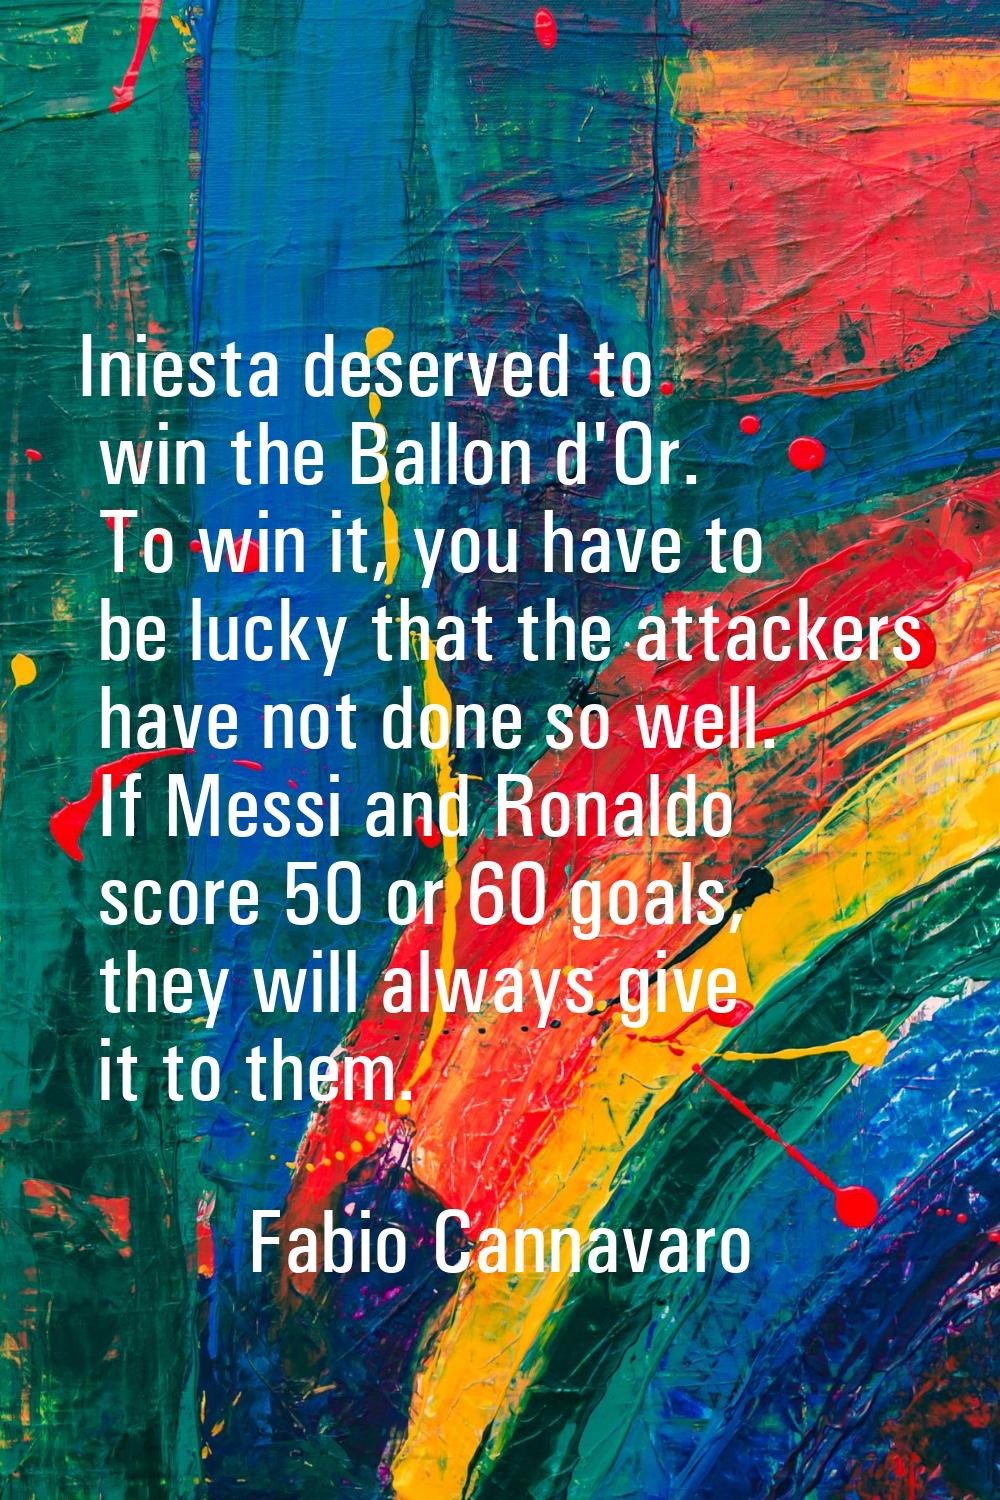 Iniesta deserved to win the Ballon d'Or. To win it, you have to be lucky that the attackers have no